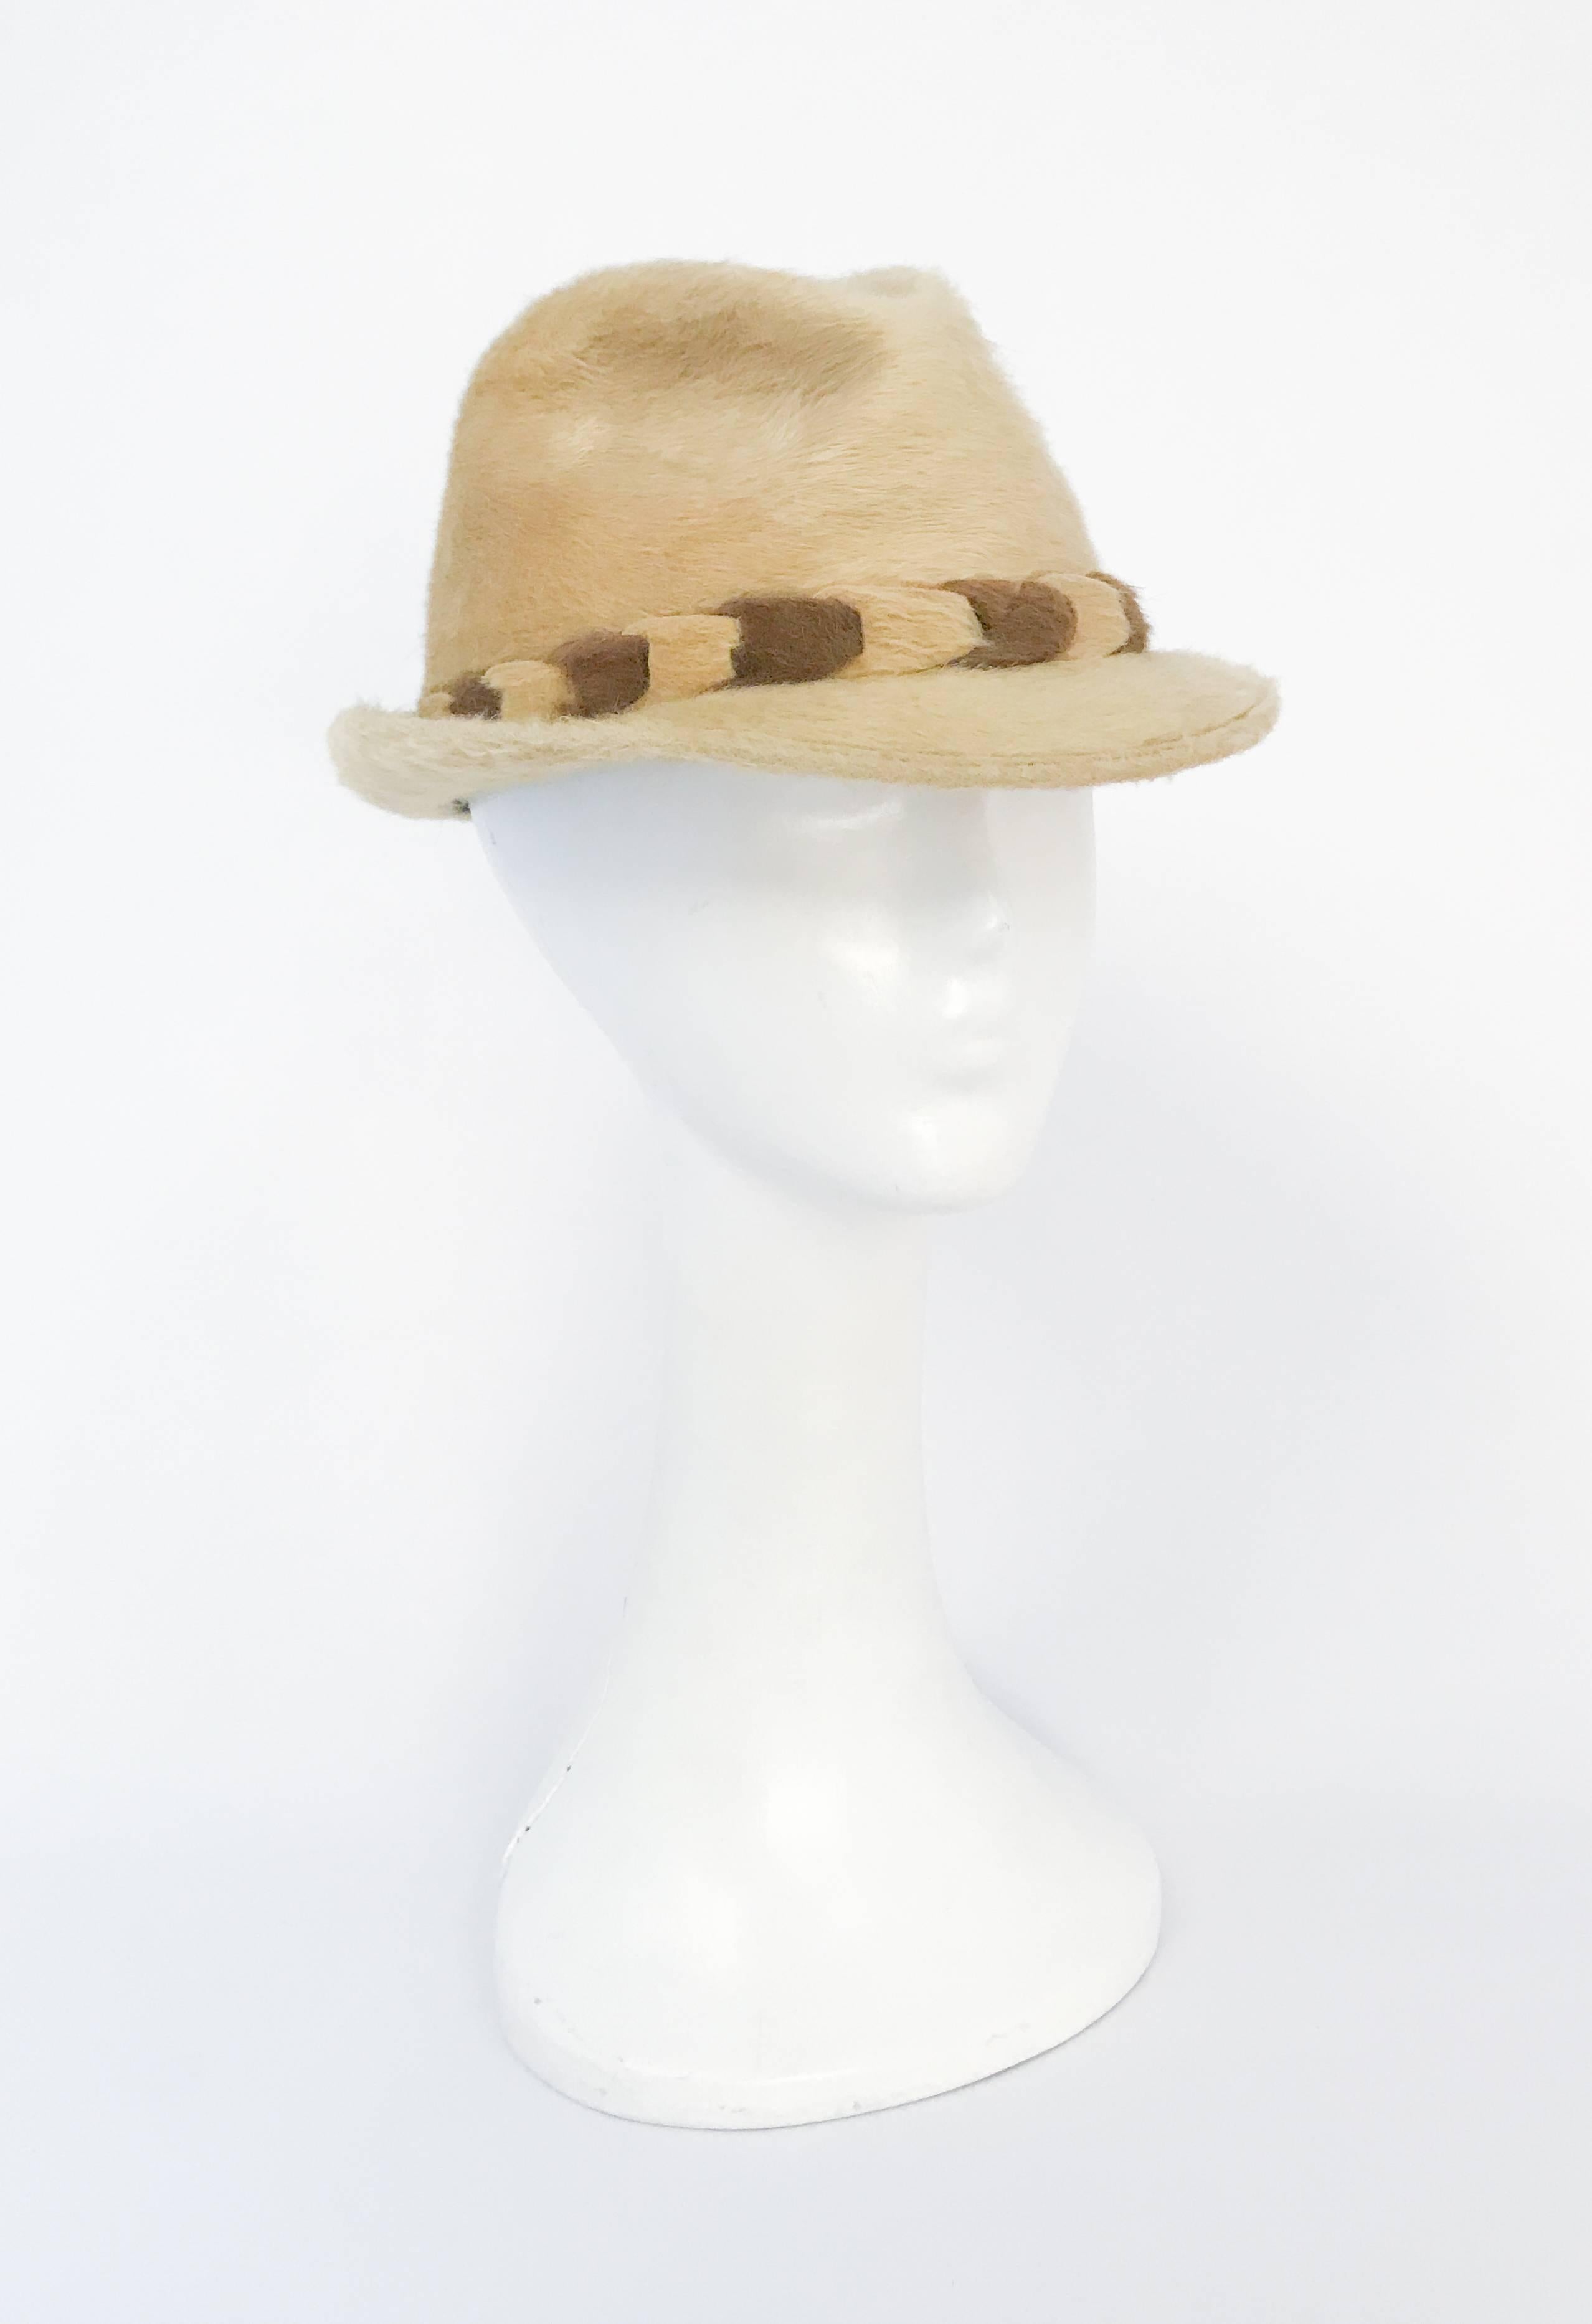 1960s Tan Beaver Felt hat with Two-Tone Band. Tan beaver felt hat with two-toned linked band. Feather accent on the side. Size 22 1/2 womens. Size 7 1/8 Mens.